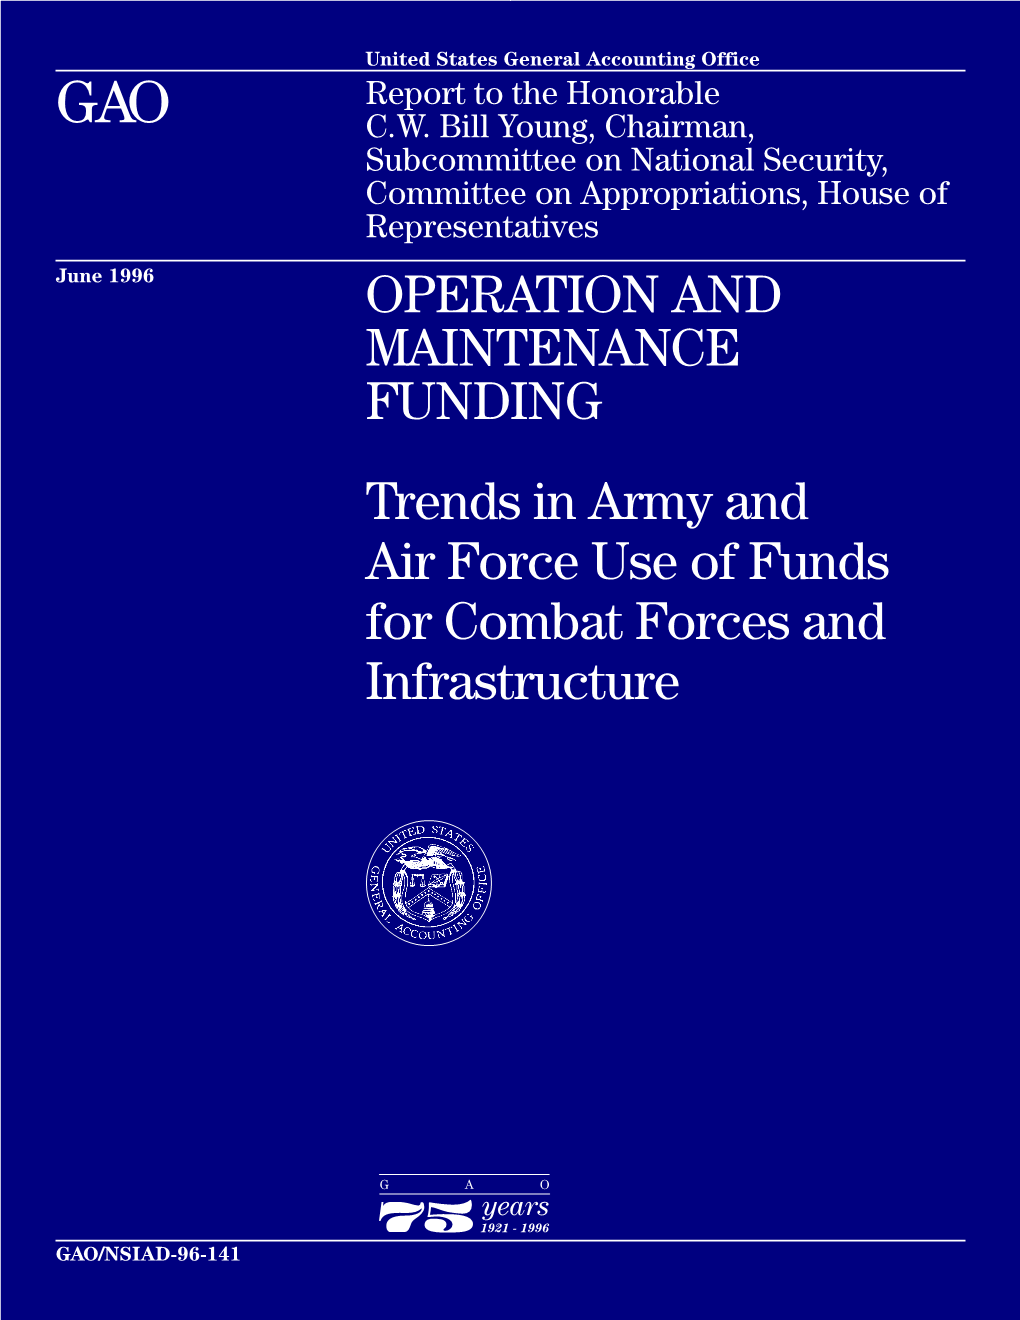 Trends in Army and Air Force Use of Funds for Combat Forces and Infrastructure